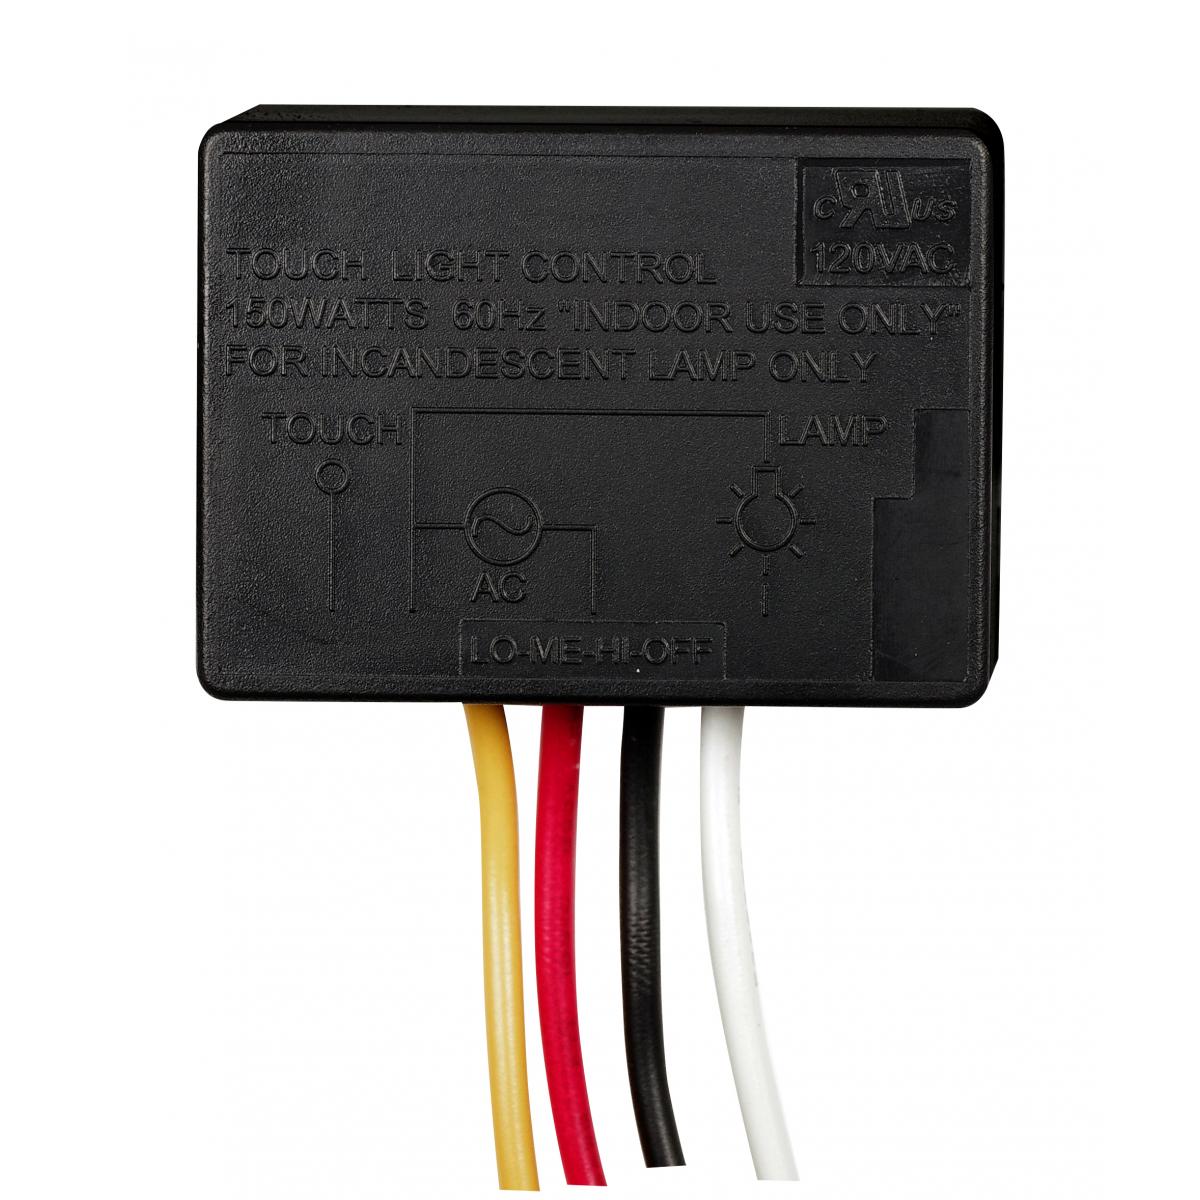 Satco 90-2428 Low-Med-Hi-Off Touch Switch Plastic Outer Shell. Rated: 150W-120V Indoor Incandescent Use Only 17/8" x 13/8" x 5/8"